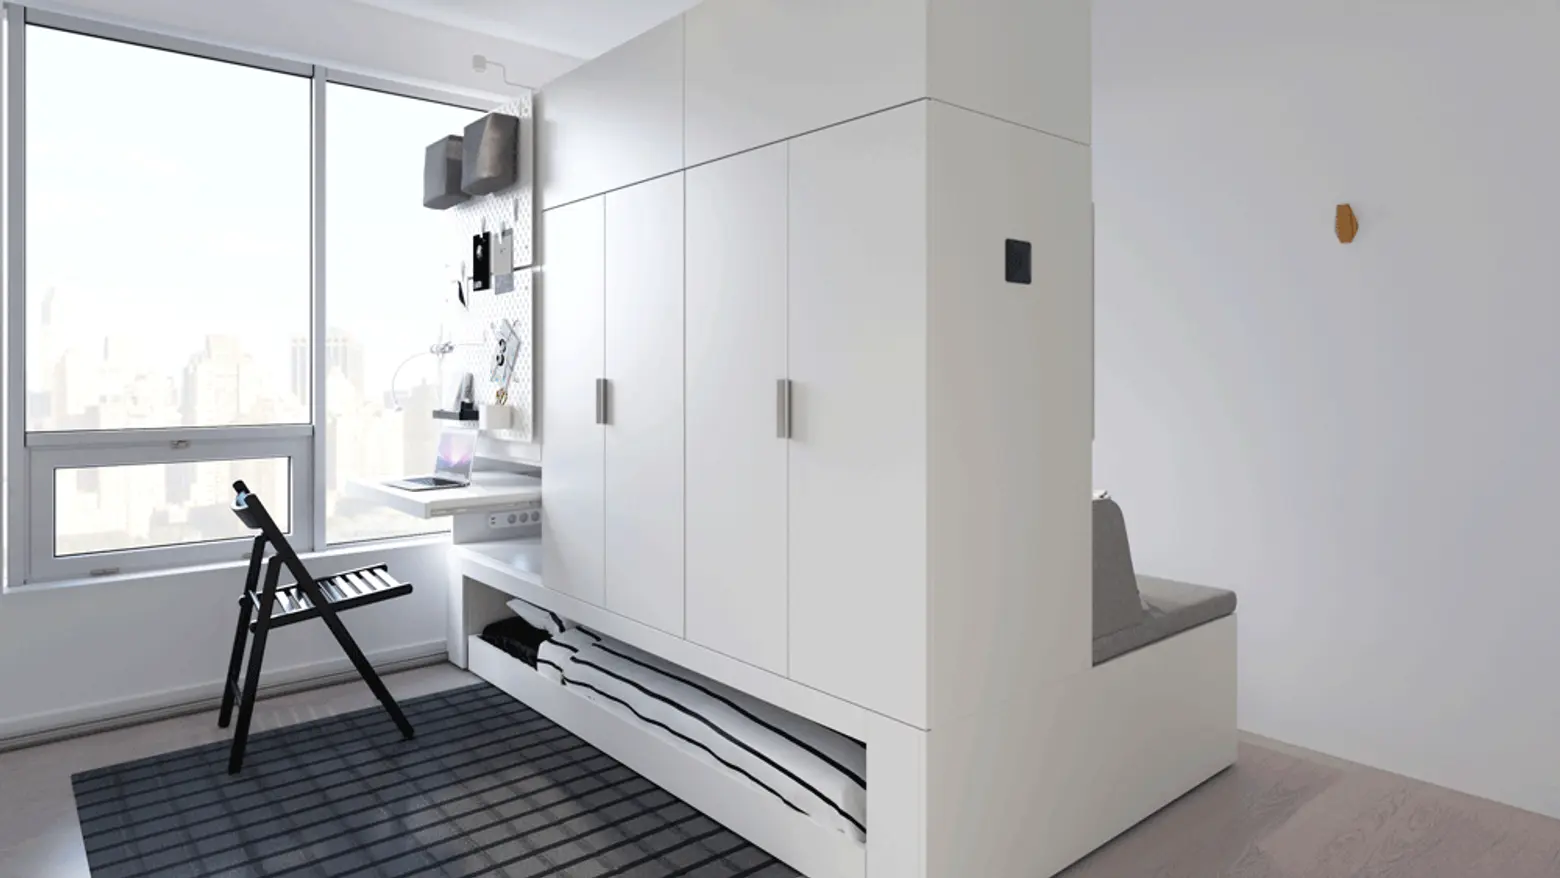 New IKEA collaboration features robotic furniture for small space living